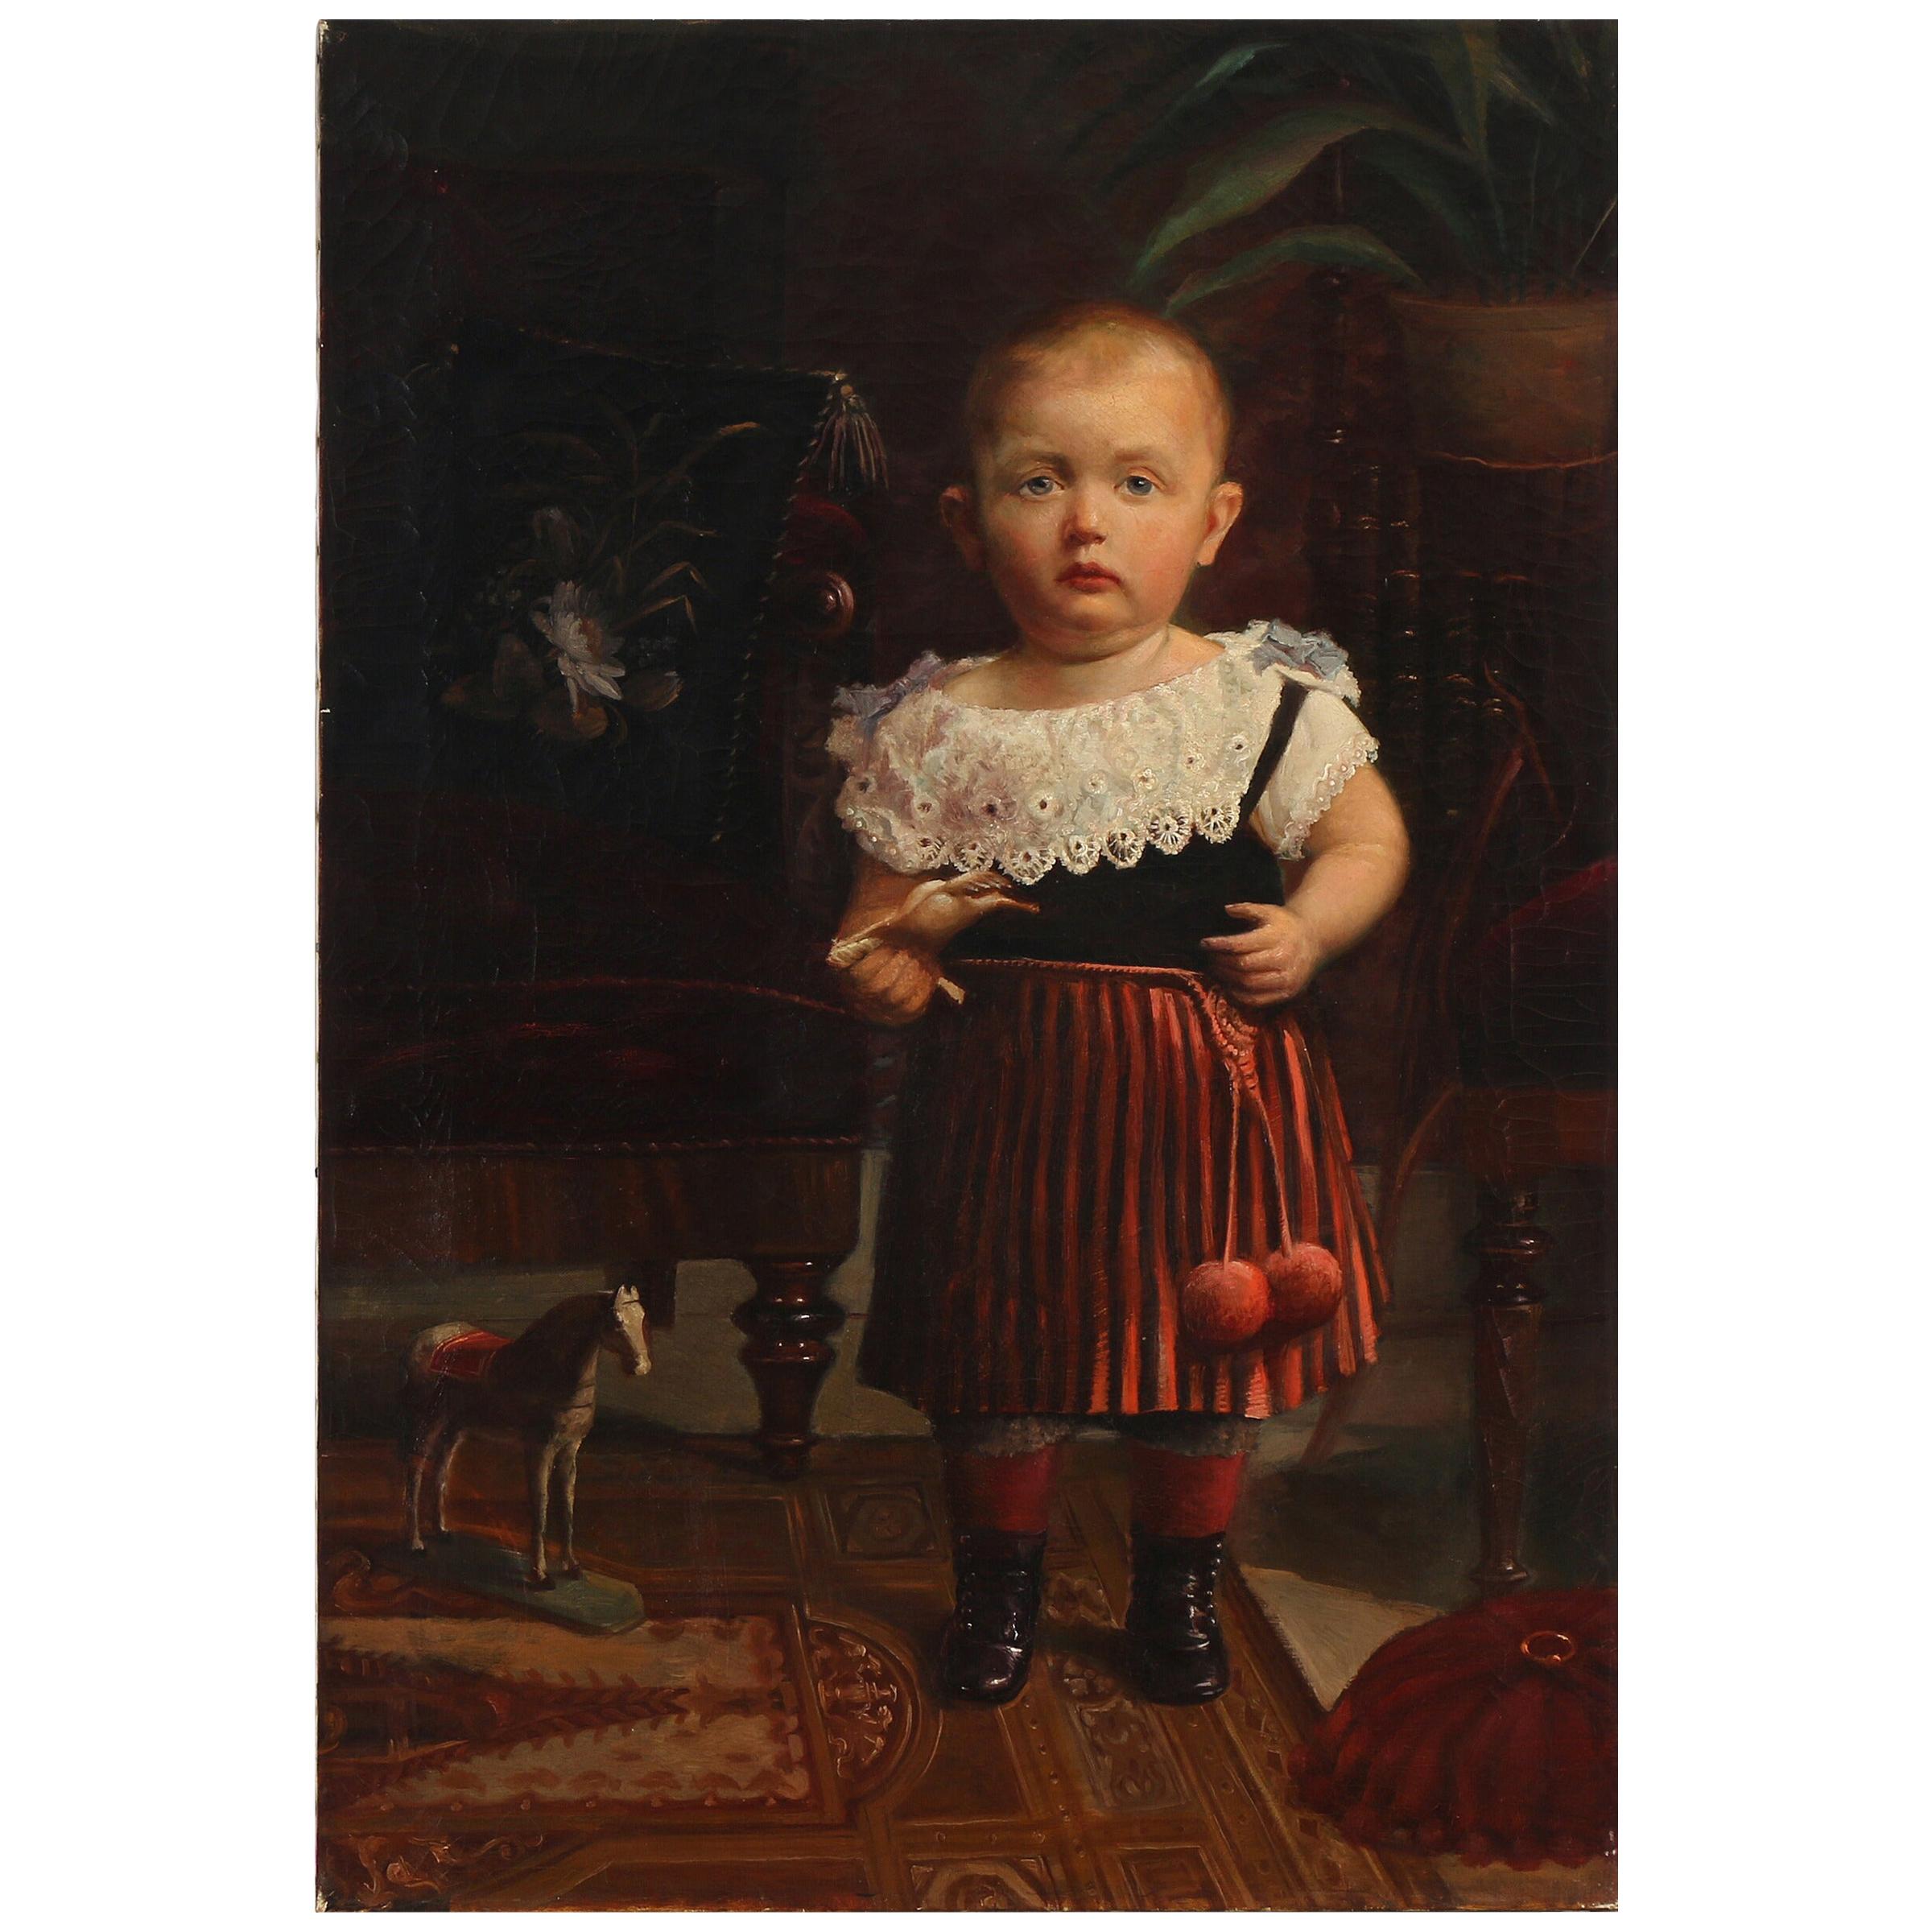 Painting Portrait of Boy with Toy Horse